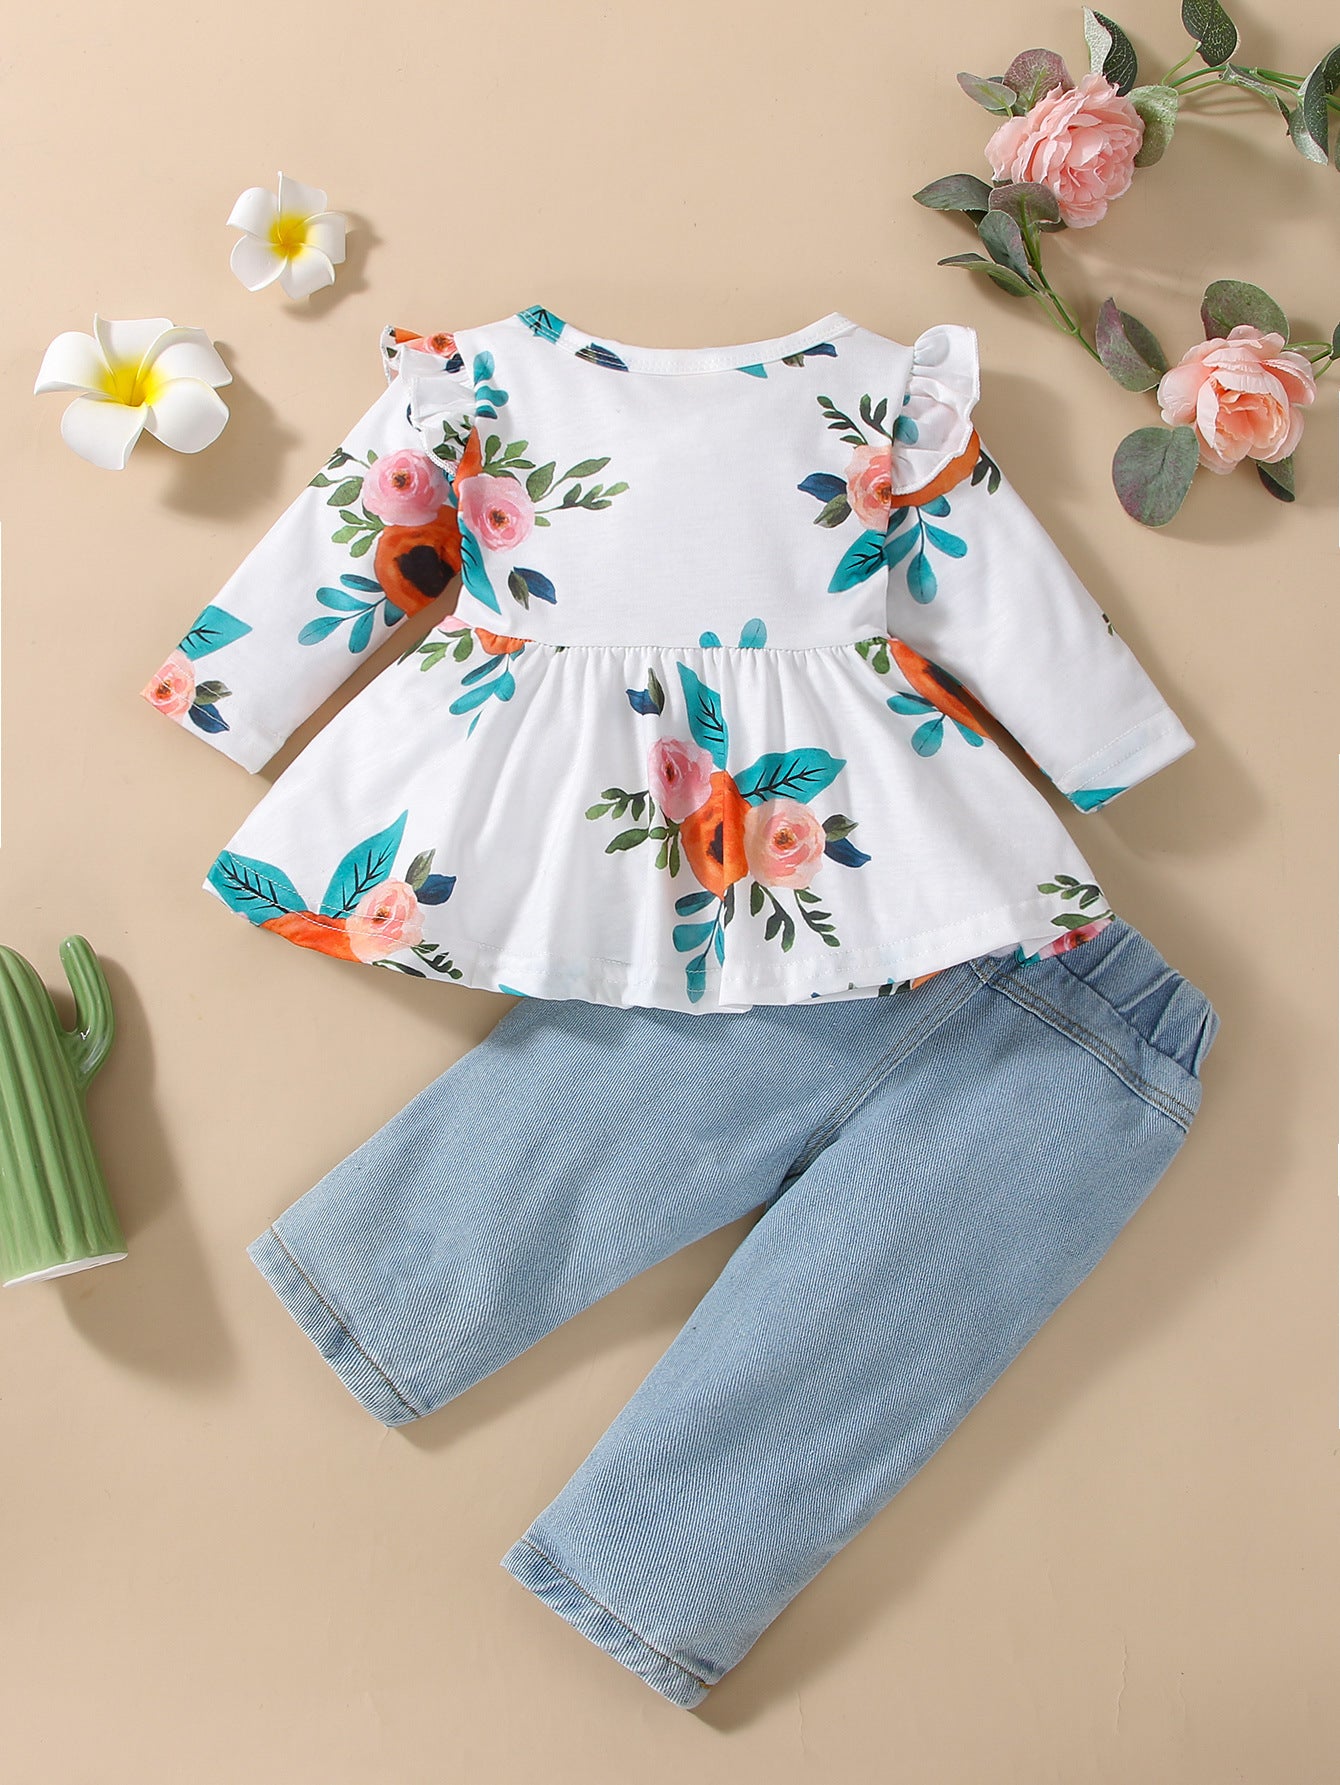 Baby Girl Suit Long Sleeve Floral Denim Fall 2 Pcs Sets